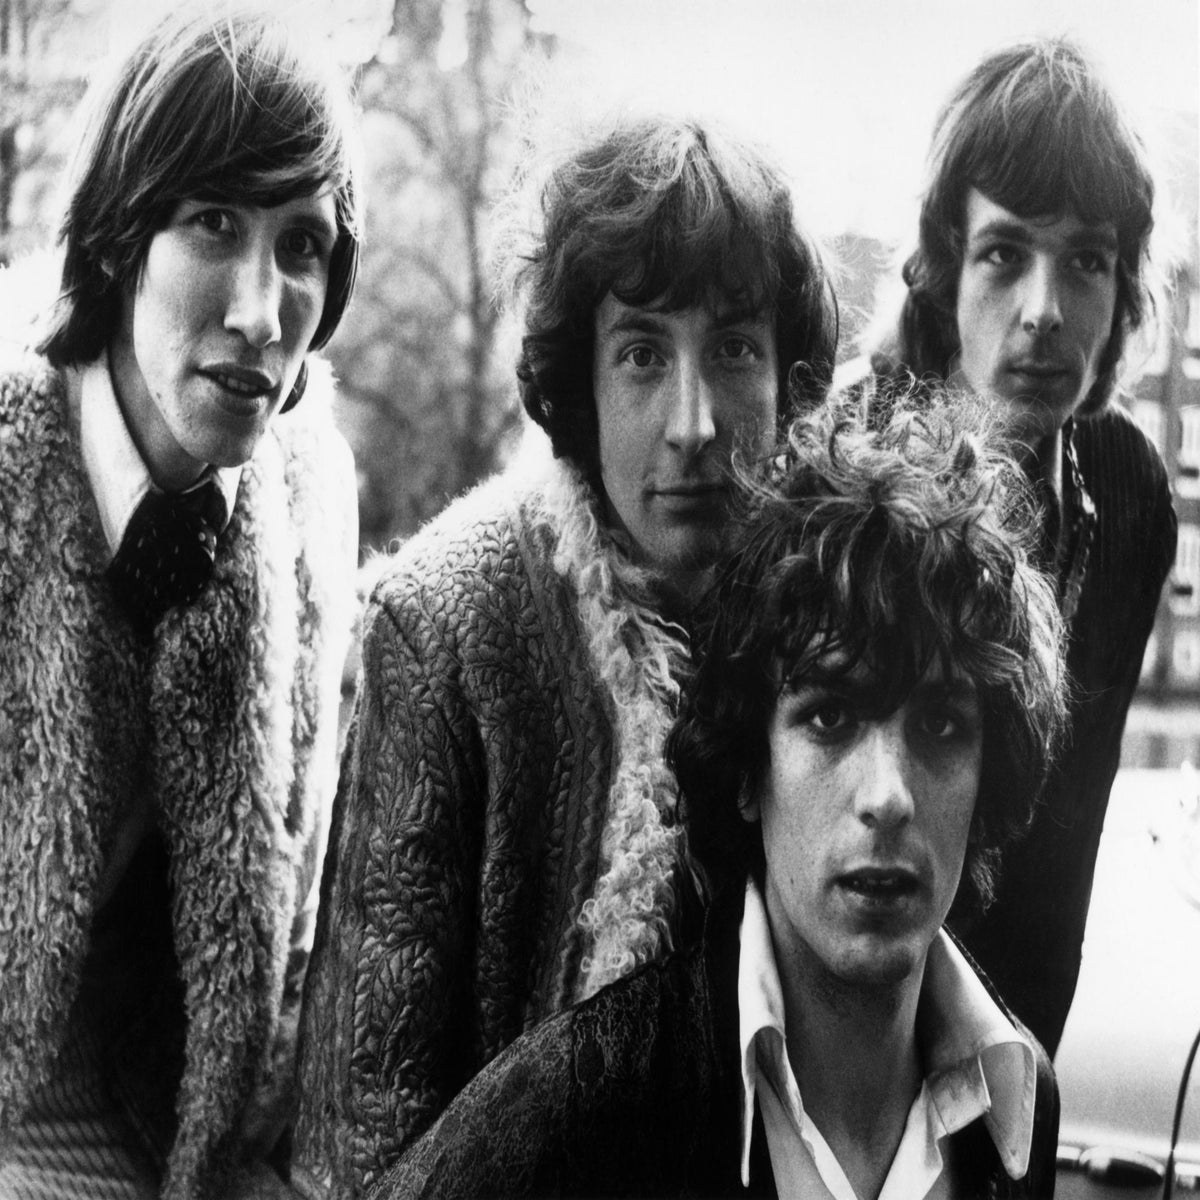 Many Faces of Pink Floyd: Various: : Music}